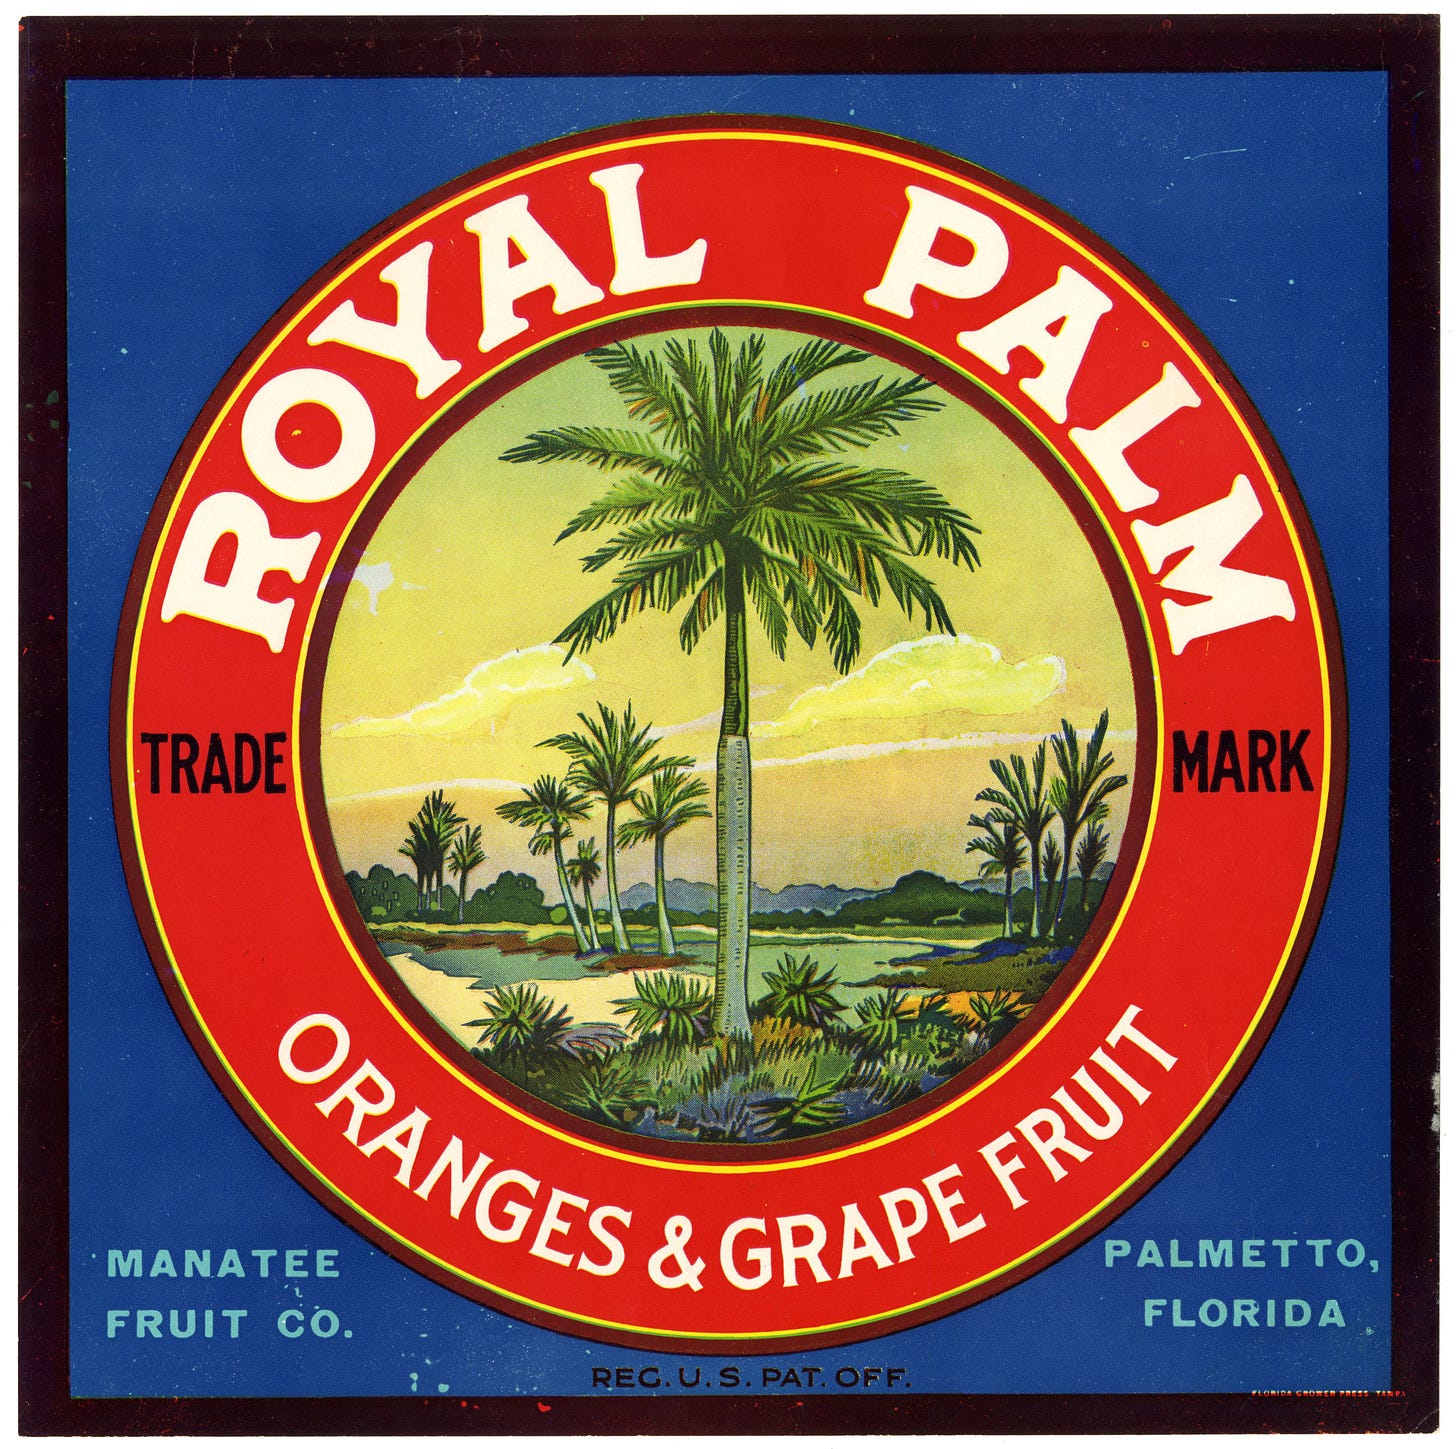 Rendering of a palm tree in a seal for Royal Palm Oranges & Grapefruit